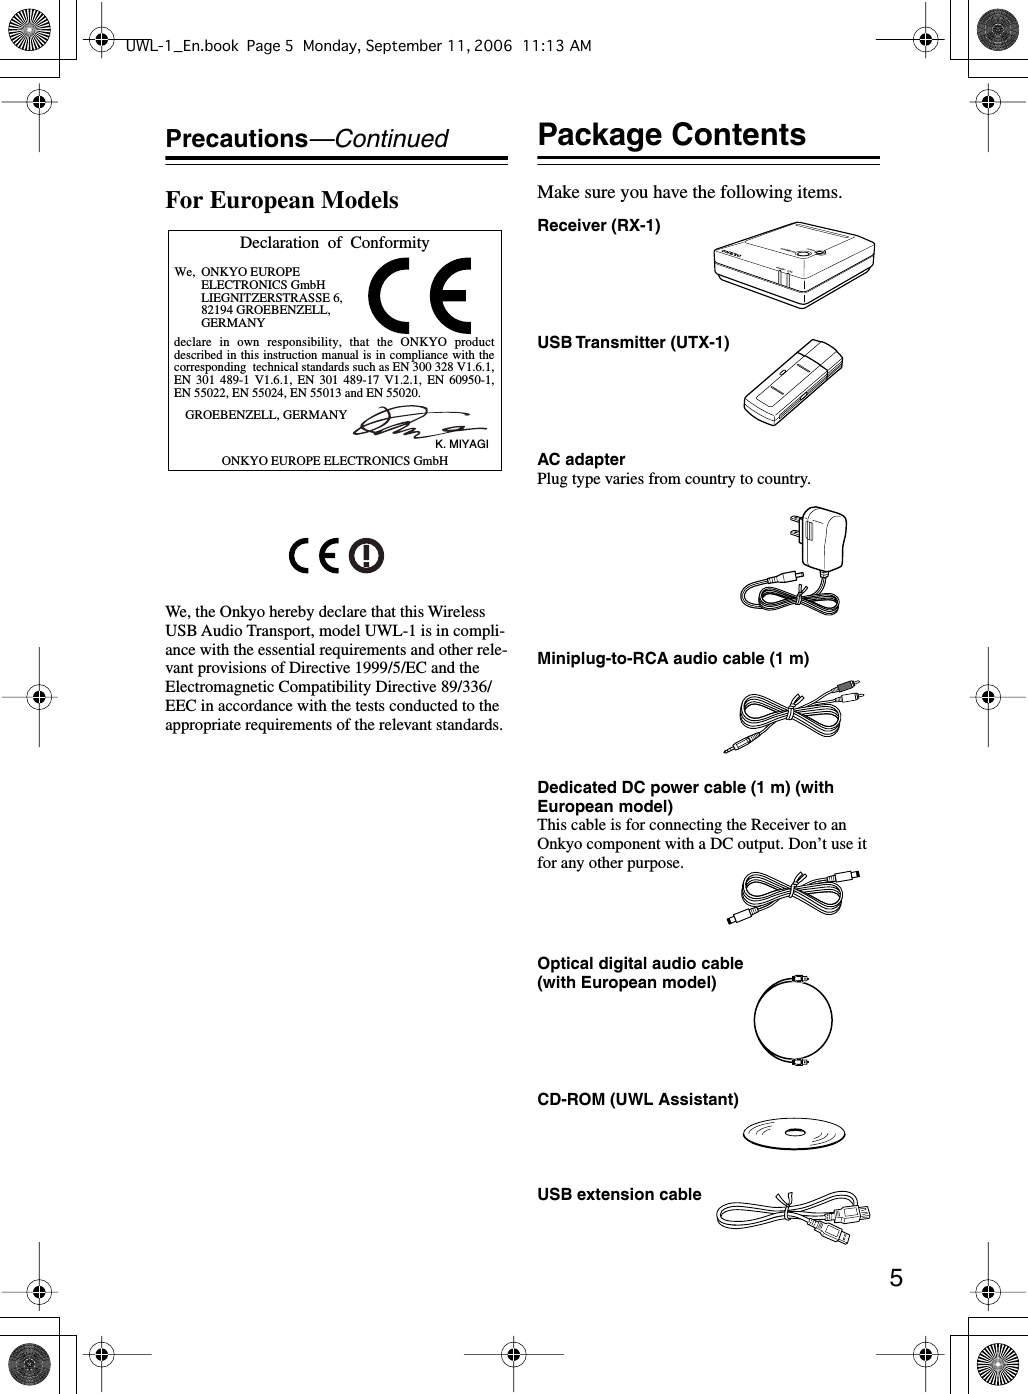  5 Precautions —Continued For European Models We, the Onkyo hereby declare that this Wireless USB Audio Transport, model UWL-1 is in compli-ance with the essential requirements and other rele-vant provisions of Directive 1999/5/EC and the Electromagnetic Compatibility Directive 89/336/EEC in accordance with the tests conducted to the appropriate requirements of the relevant standards. Package Contents Make sure you have the following items.Declaration  of  ConformityWe, ONKYO EUROPEELECTRONICS GmbHLIEGNITZERSTRASSE 6, 82194 GROEBENZELL, GERMANYGROEBENZELL, GERMANYONKYO EUROPE ELECTRONICS GmbHK. MIYAGIdeclare in own responsibility, that the ONKYO product described in this instruction manual is in compliance with the corresponding  technical standards such as EN 300 328 V1.6.1, EN 301 489-1 V1.6.1, EN 301 489-17 V1.2.1, EN 60950-1, EN 55022, EN 55024, EN 55013 and EN 55020.Receiver (RX-1)USB Transmitter (UTX-1)AC adapterPlug type varies from country to country.Miniplug-to-RCA audio cable (1 m)Dedicated DC power cable (1 m) (with European model)This cable is for connecting the Receiver to an Onkyo component with a DC output. Don’t use it for any other purpose.Optical digital audio cable (with European model)CD-ROM (UWL Assistant)USB extension cableUWL-1_En.book Page 5 Monday, September 11, 2006 11:13 AM